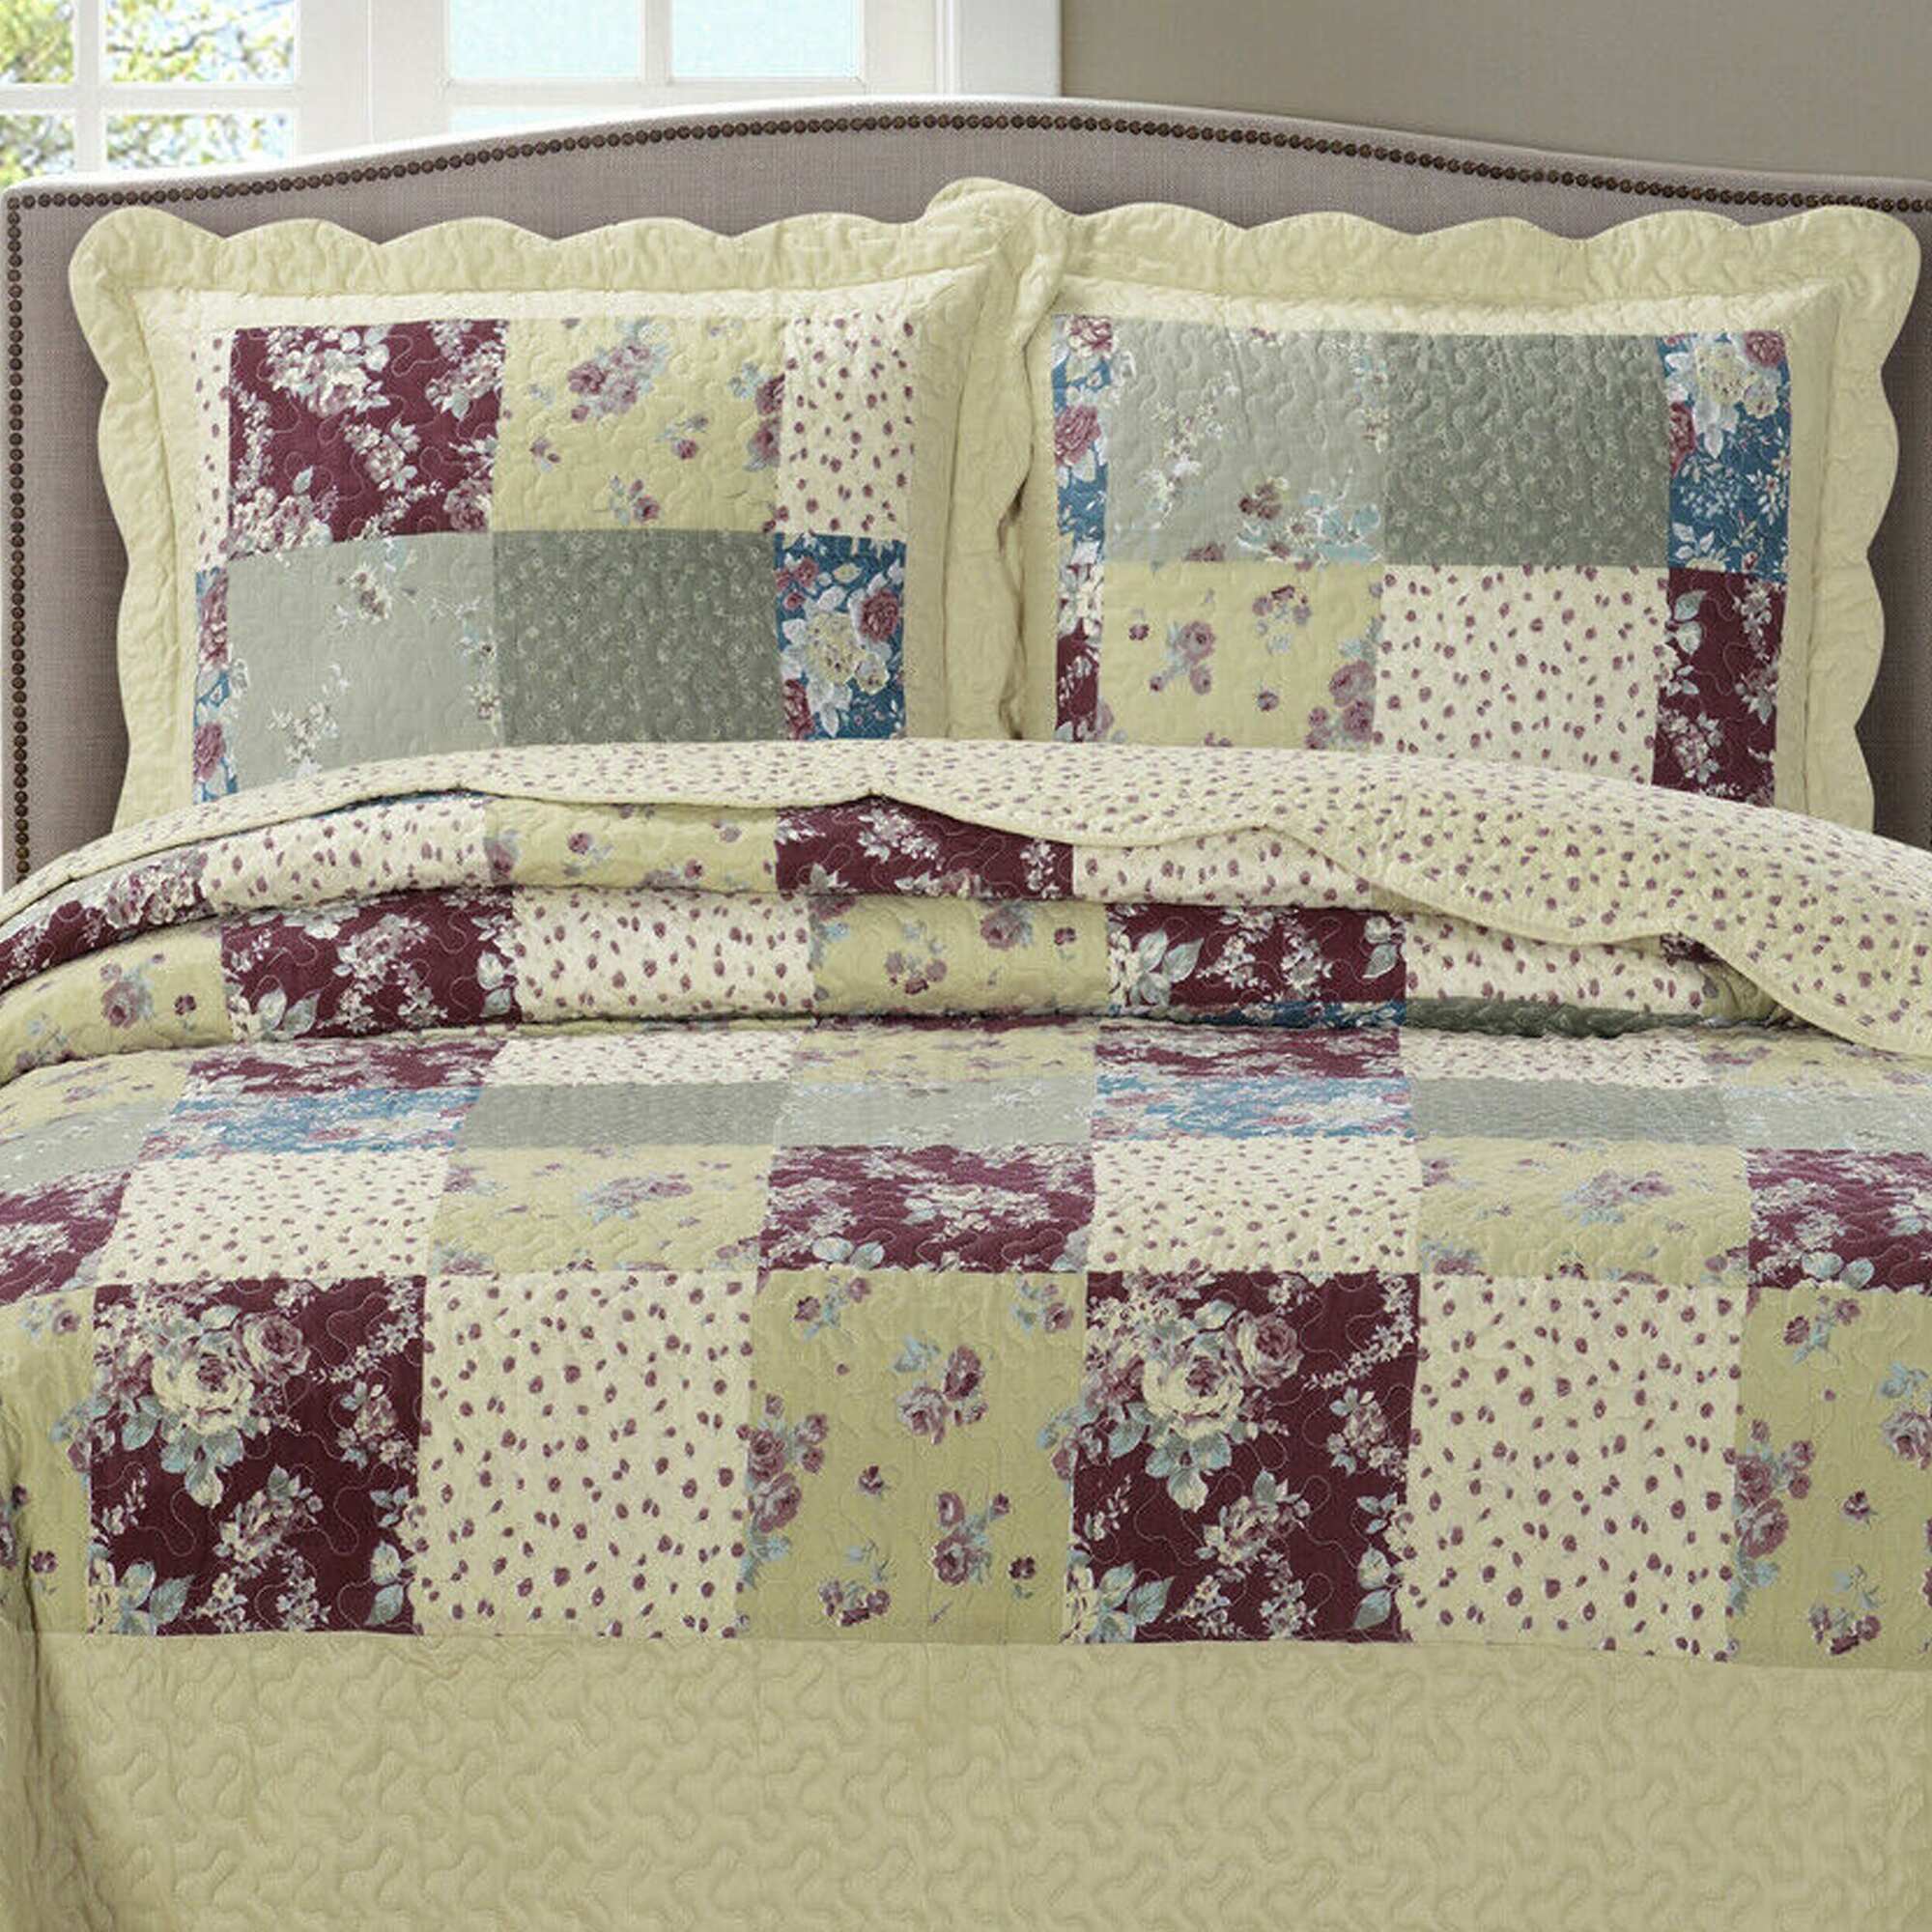 Luxury 2 Pieces Oversized Bedspread Set Reversible Quilt Twin Tania